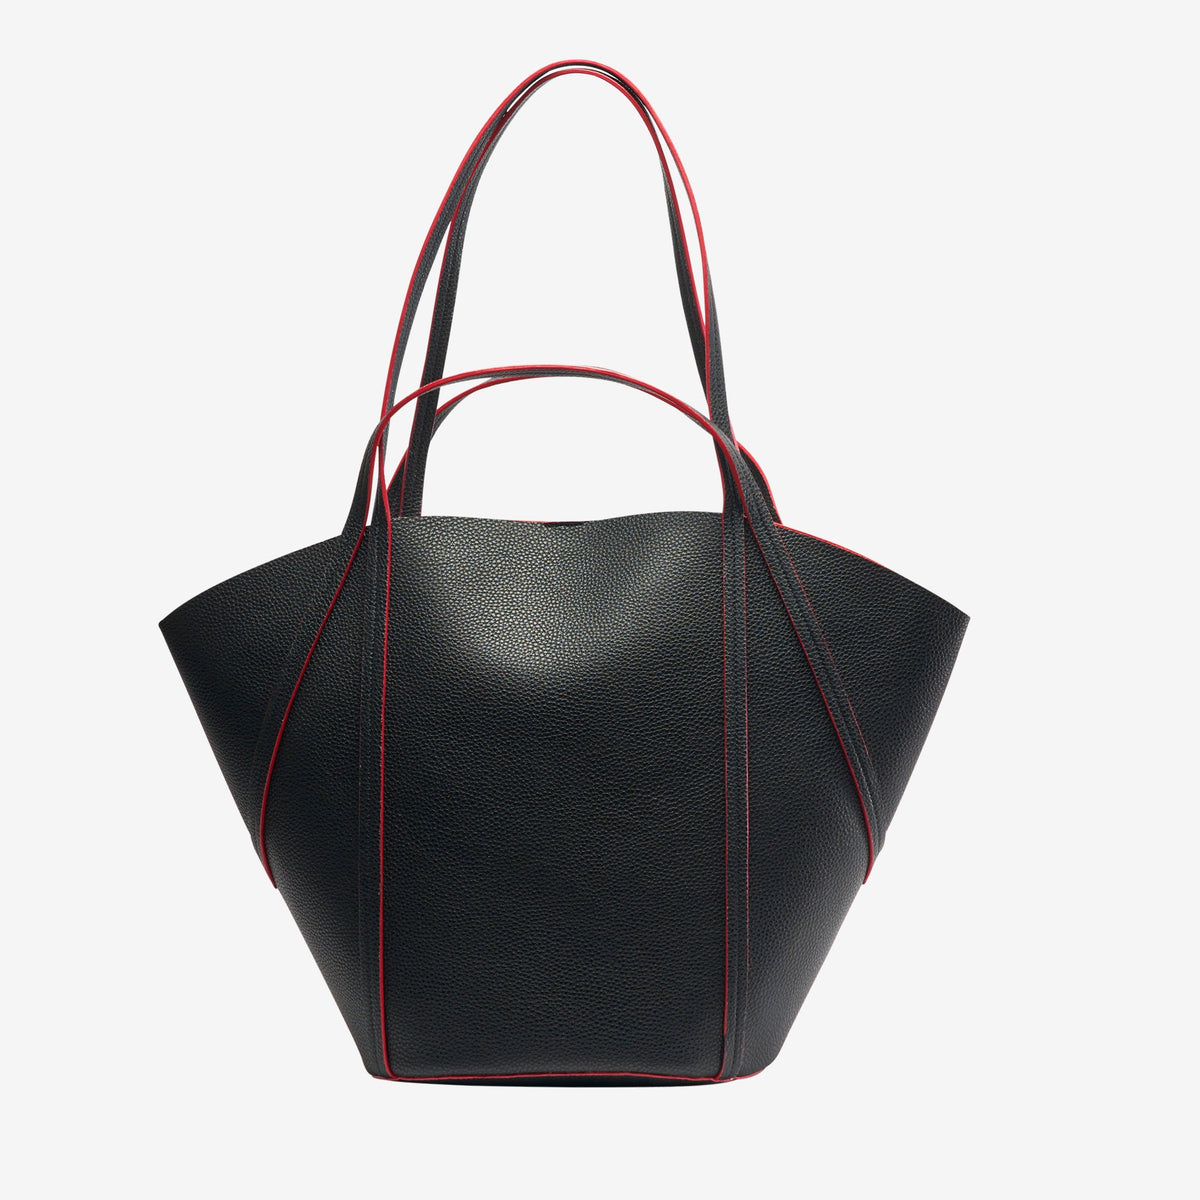    tusk-9931-recycled-sustainable-leather-tote-black-front